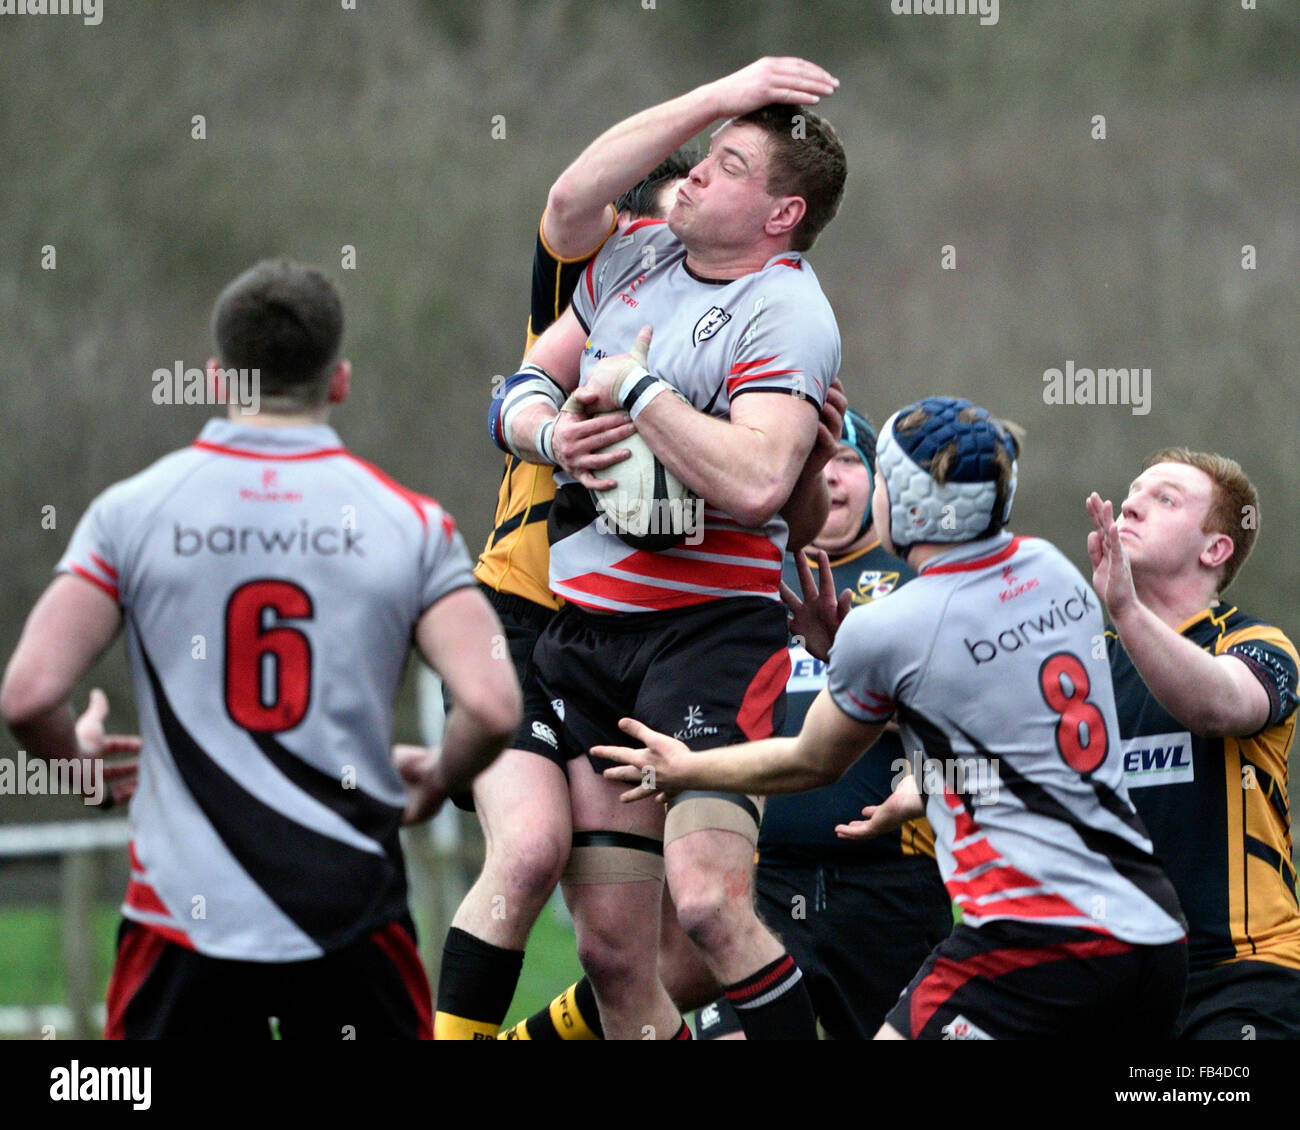 Burnage  9th Janusry 2016 An Ilkley player wins  the ball in a match in which Burnage Rugby Club were attempting to move from bottom place in the league but were heavily defeated by Ilkley, who were third bottom. Credit:  John Fryer/Alamy Live News Stock Photo